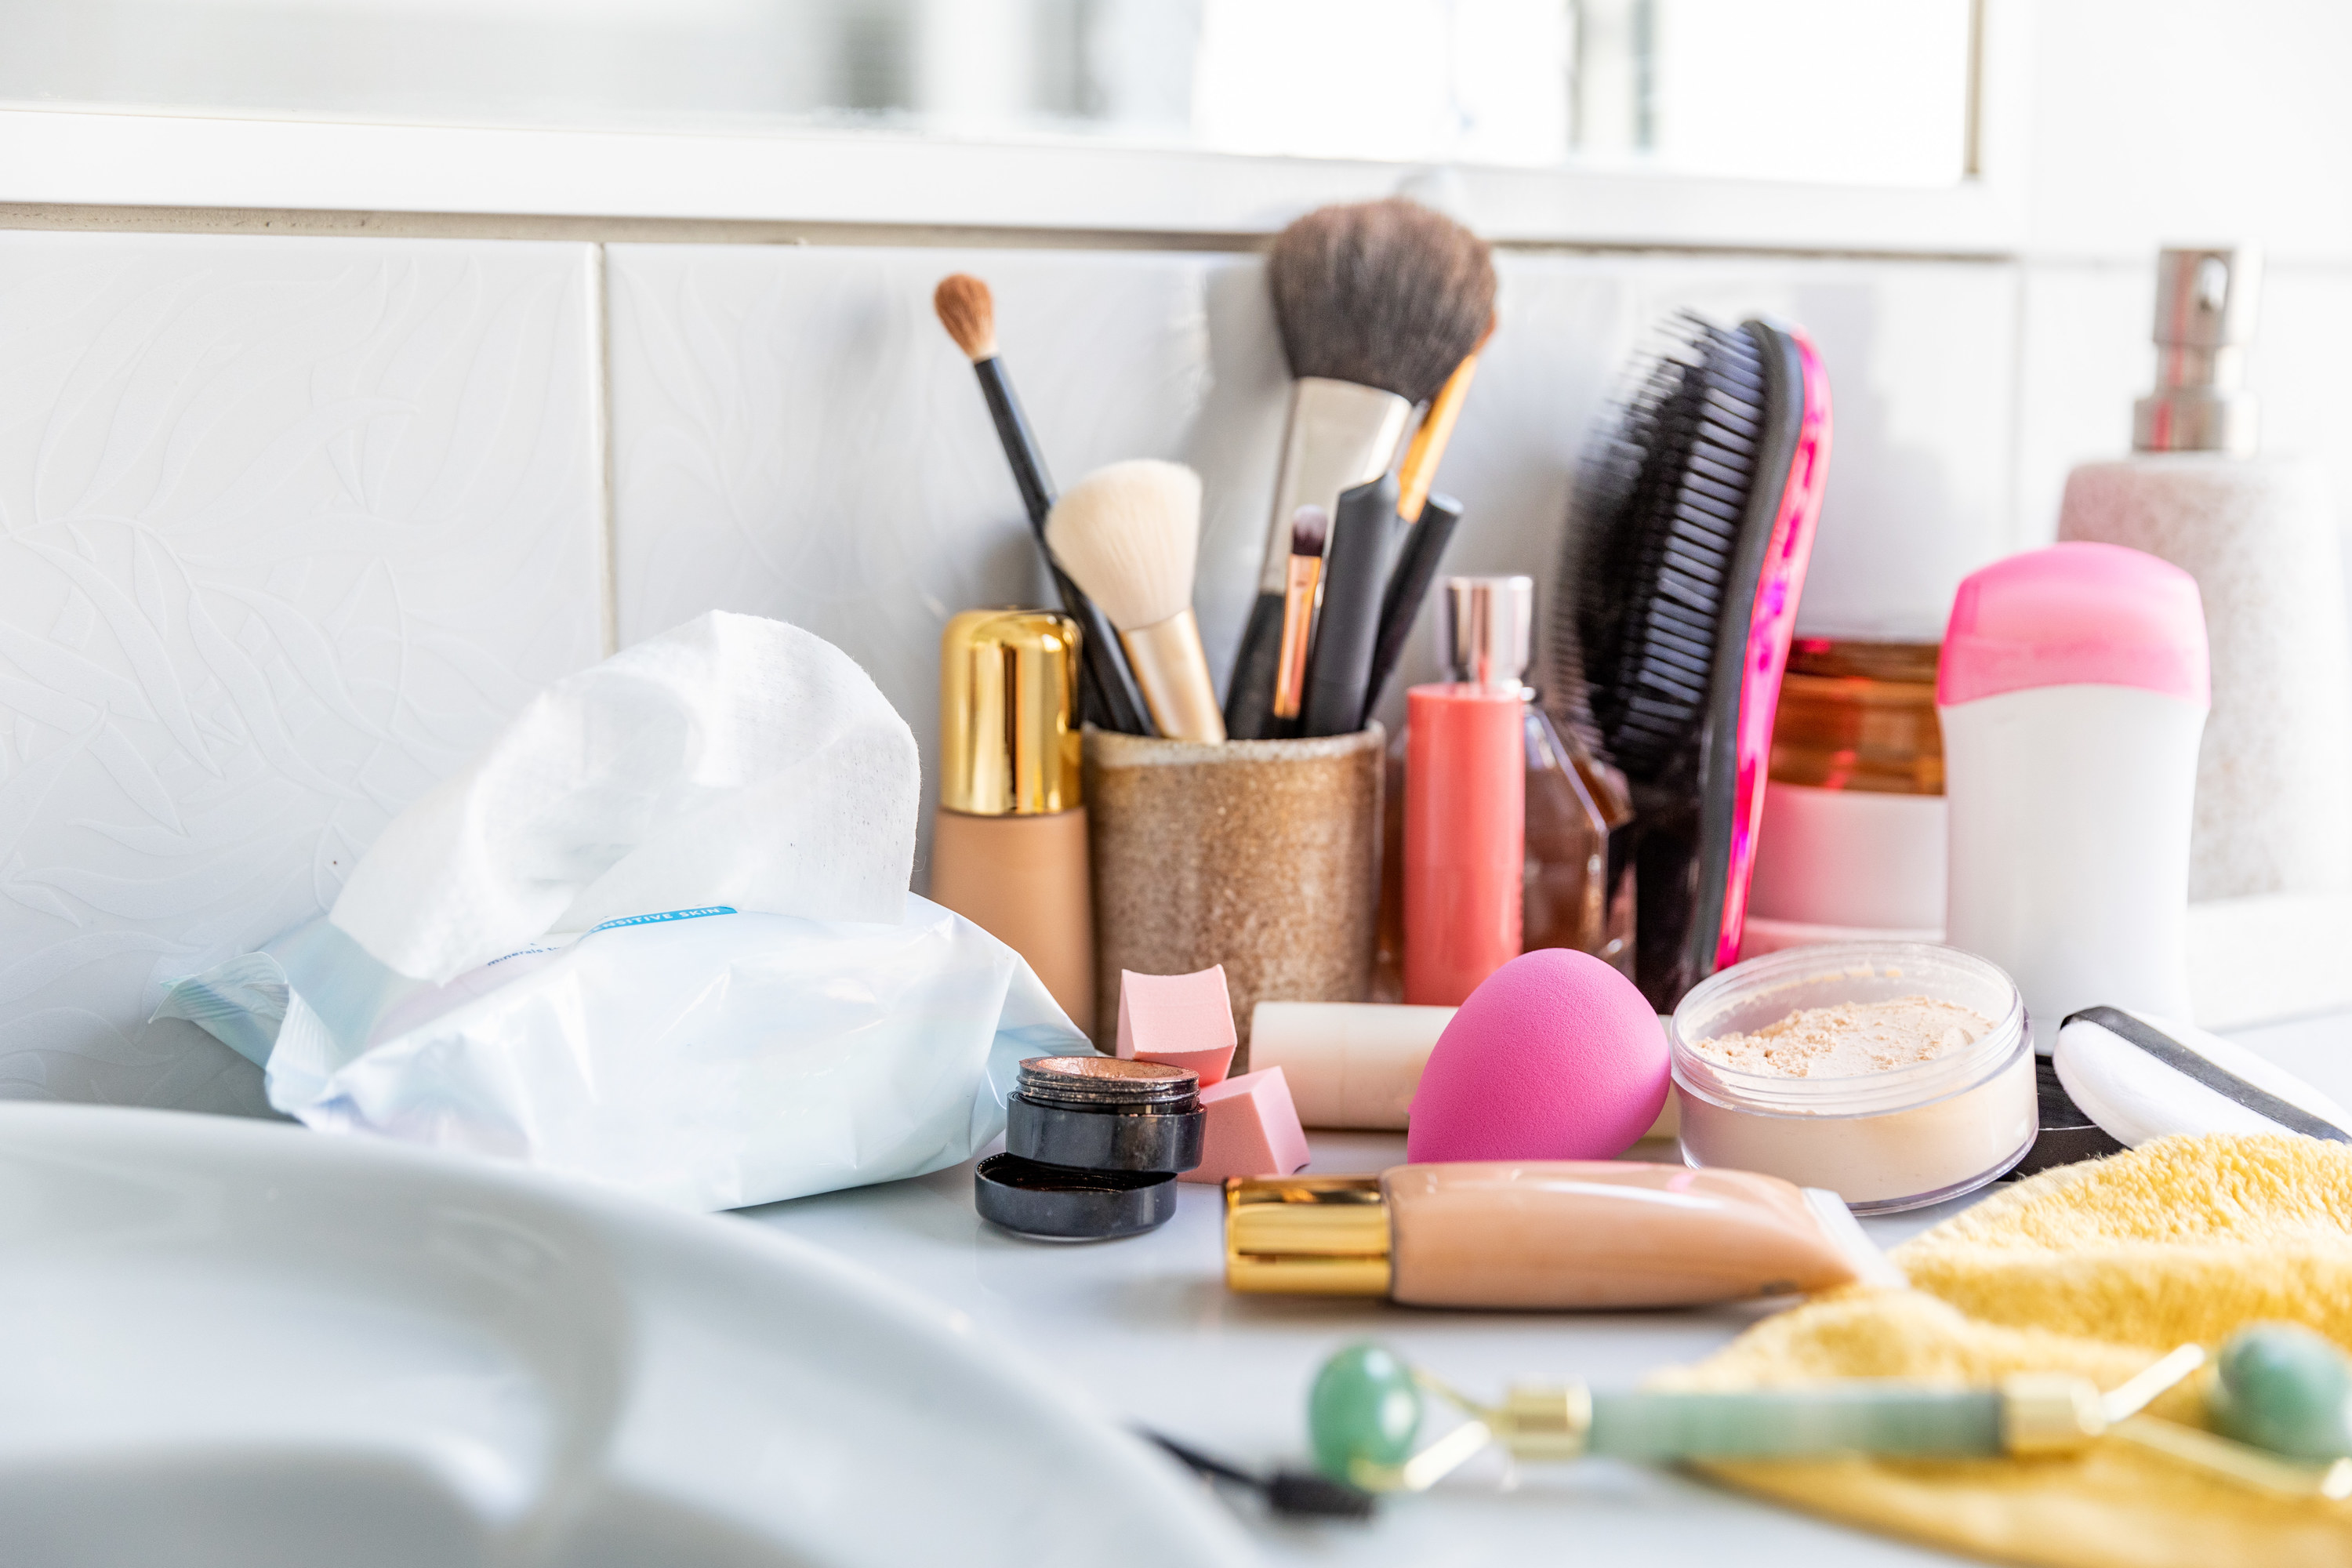 Makeup products strewn aroudn a sink